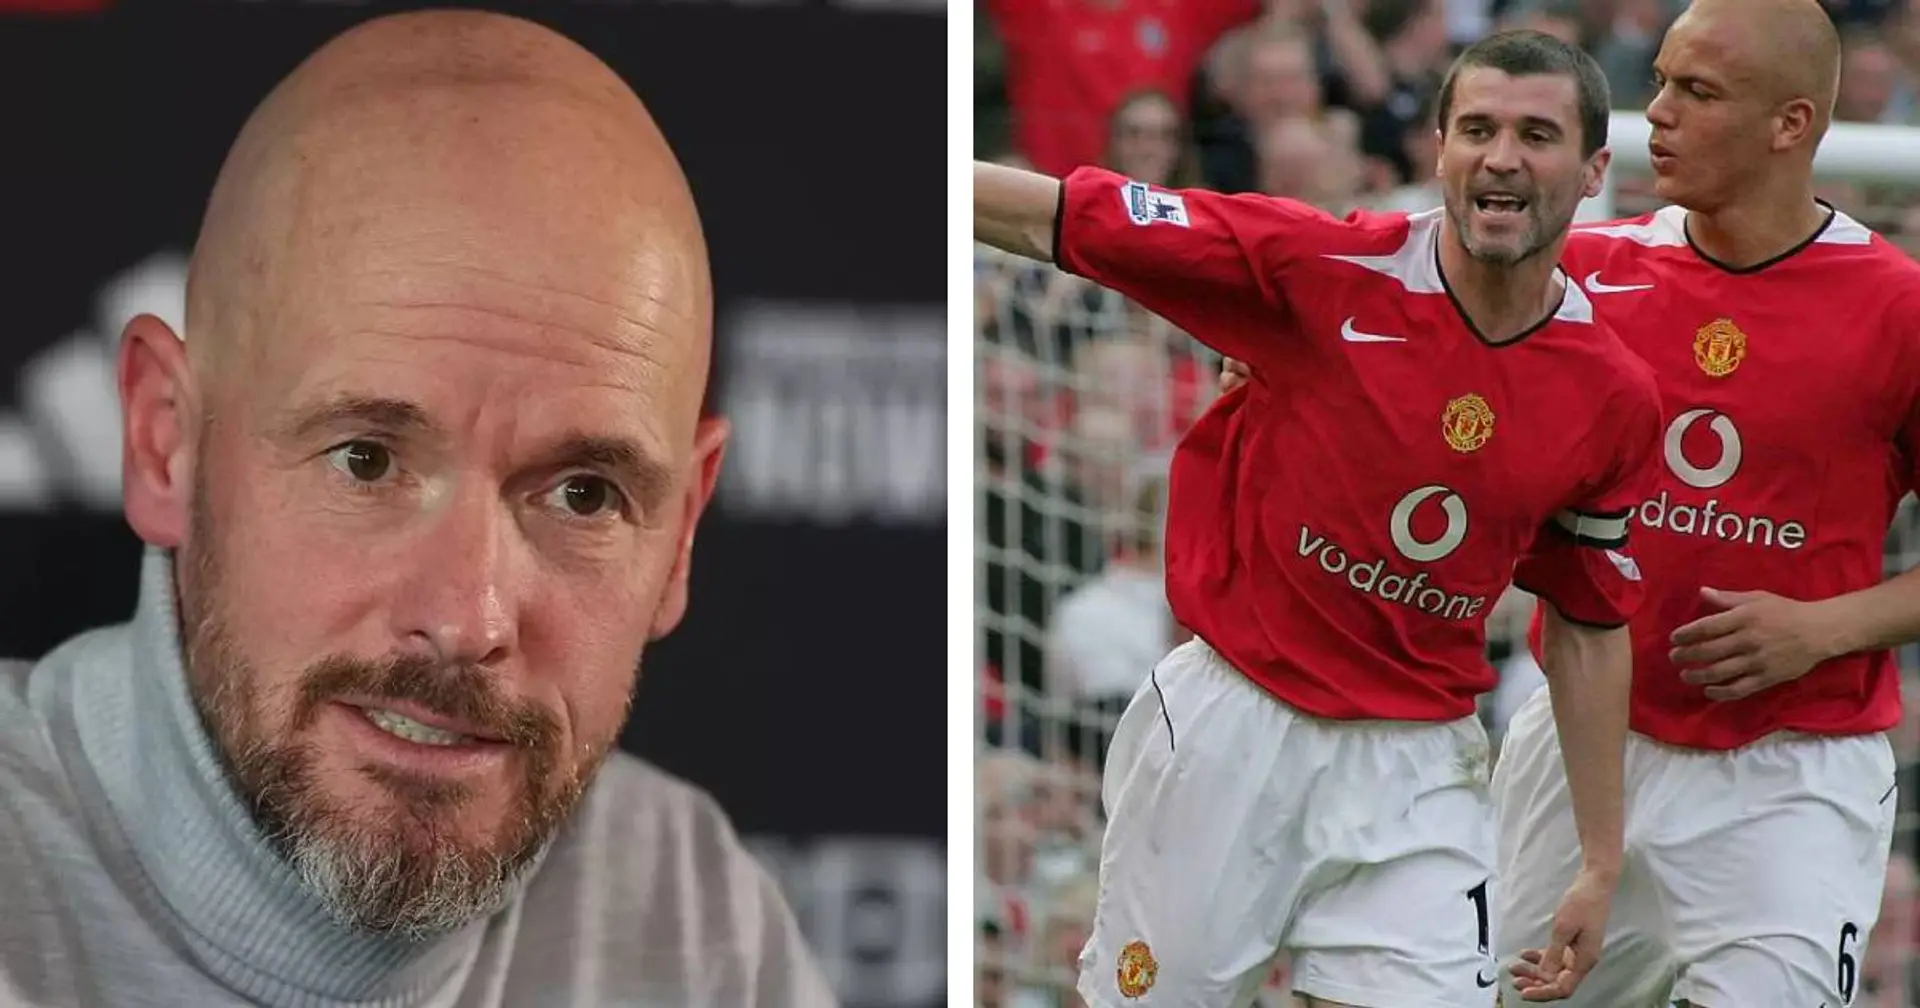 Ten Hag: 'Man United of 2004/05 didn't play great football, they took time' 